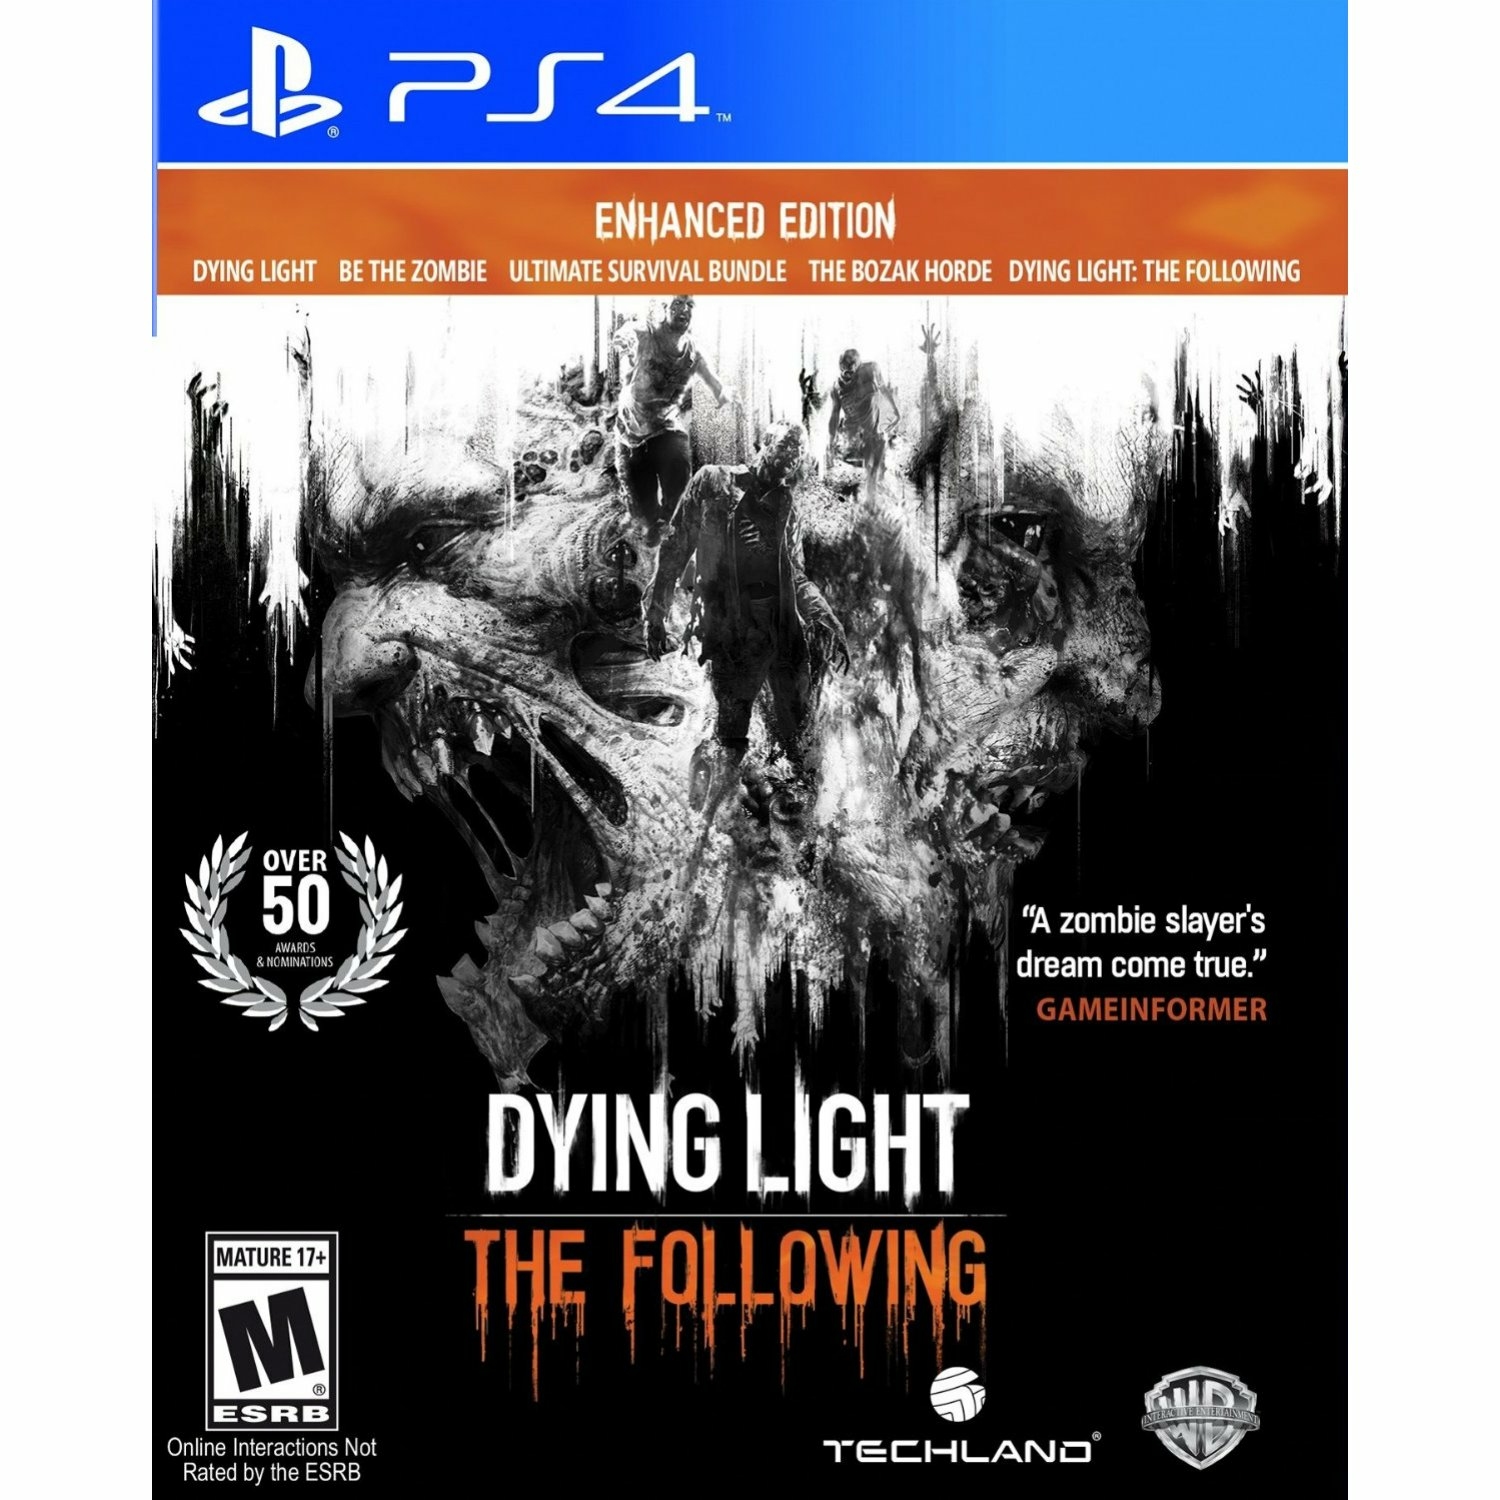 dying light 1.12 update ps4